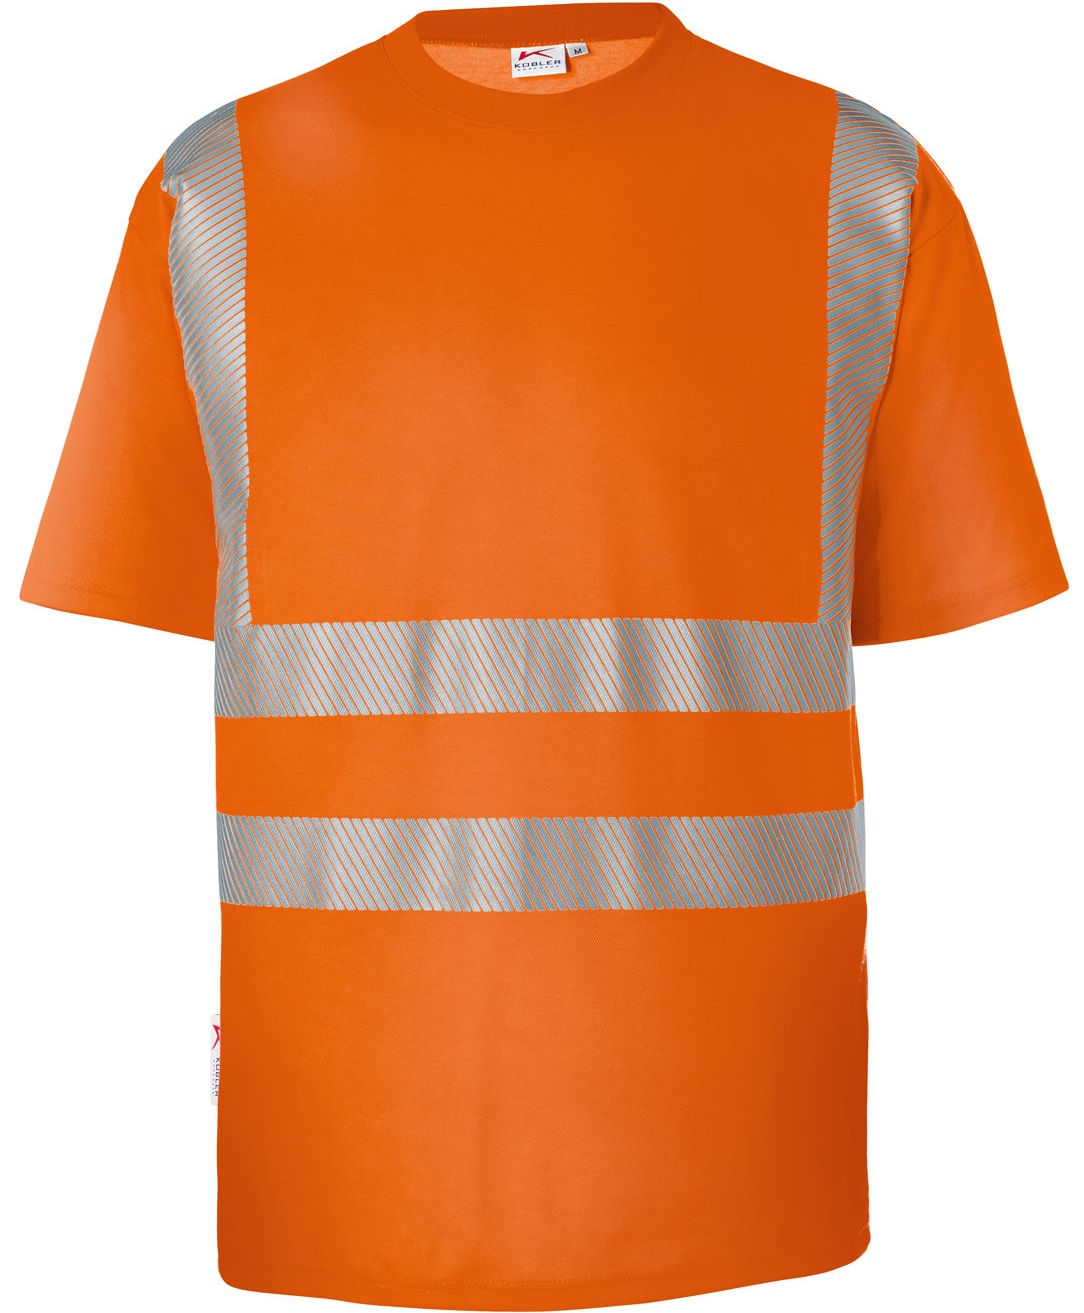 Kübler REFLECTIQ T-shirt PSA 2 By profession polo 5043 Vis 8227 & Industrial safety | Clever-AS-Technik T-shirts Warning | | Hi - shirts protection 